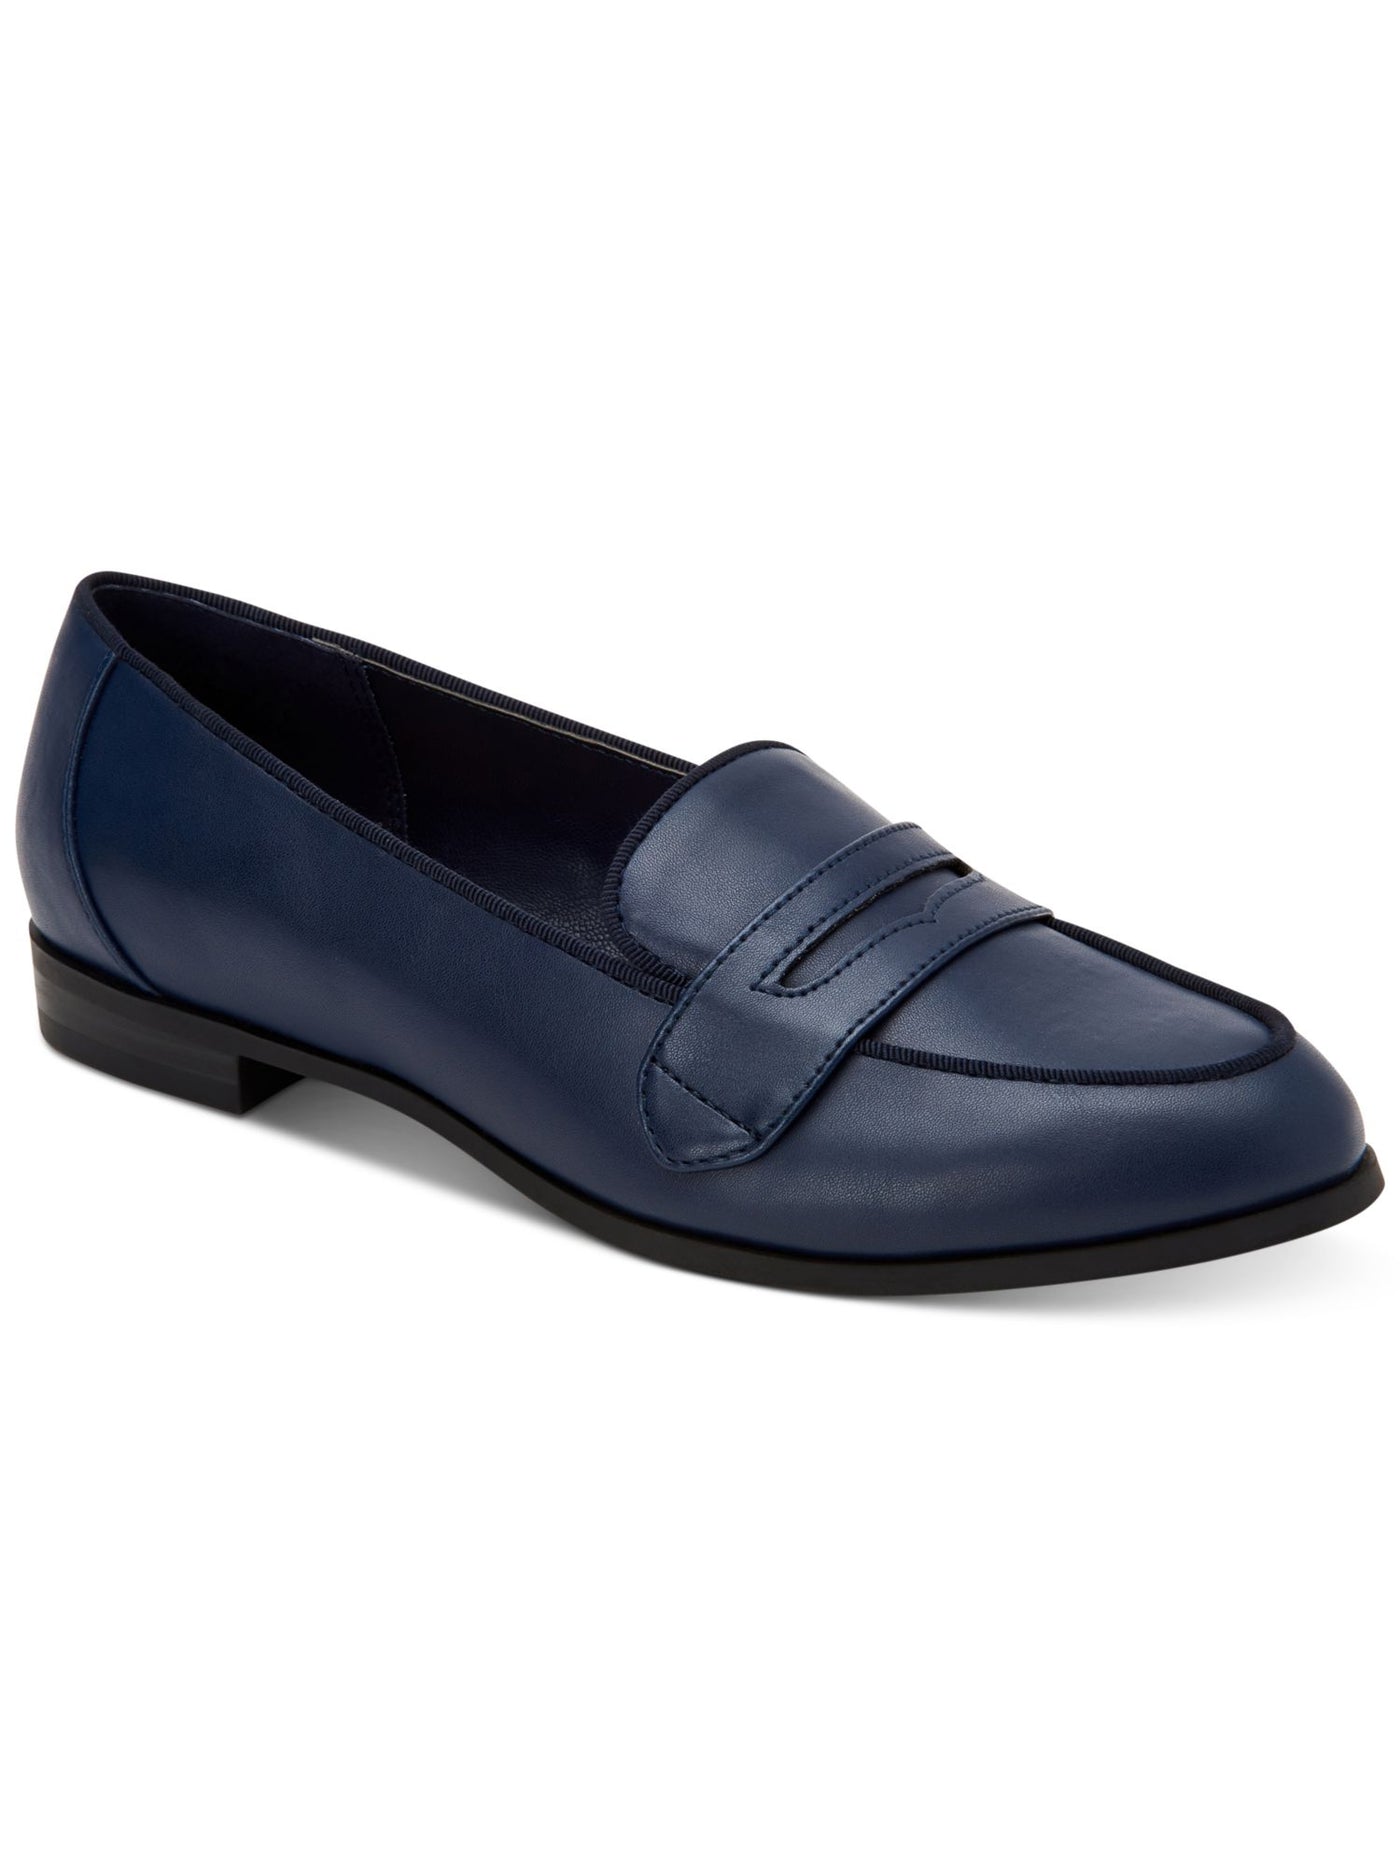 CHARTER CLUB Womens Navy Penny Keeper Detail Comfort Viviian Pointed Toe Slip On Loafers Shoes 6 M